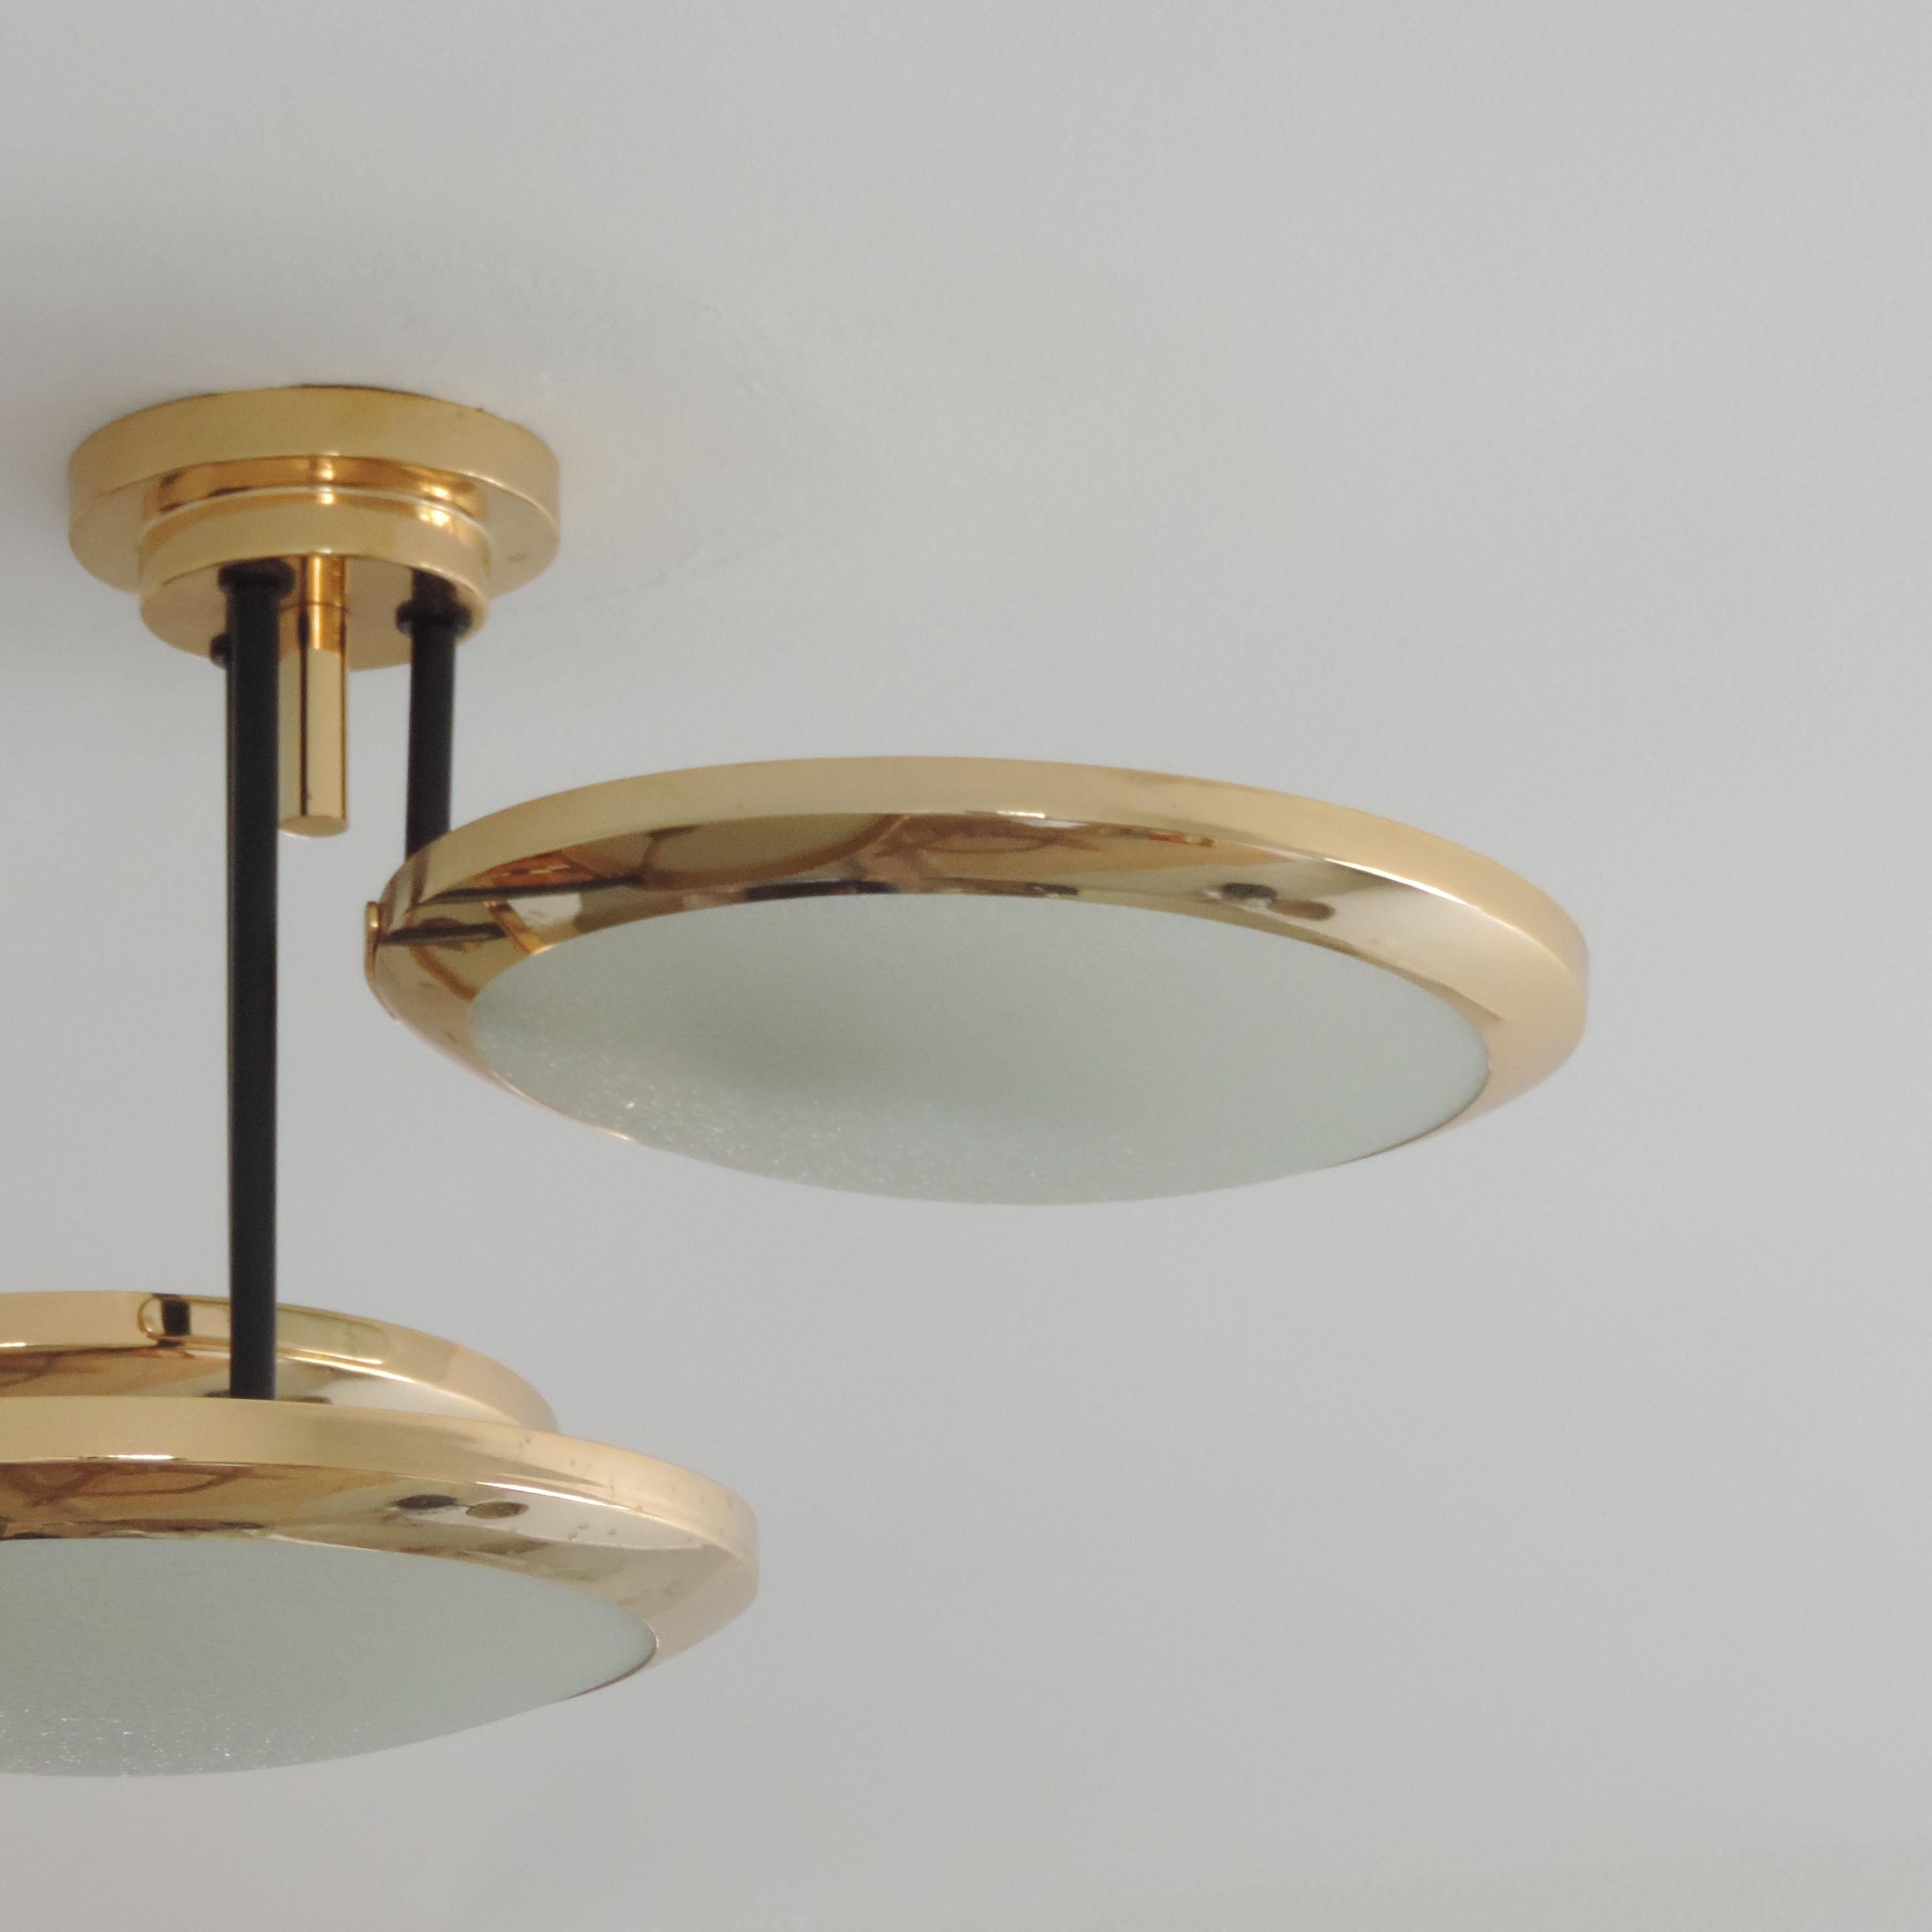 Italian Stilnovo Three Discs Ceiling Lamp in Brass and Glass, Italy 1950s For Sale